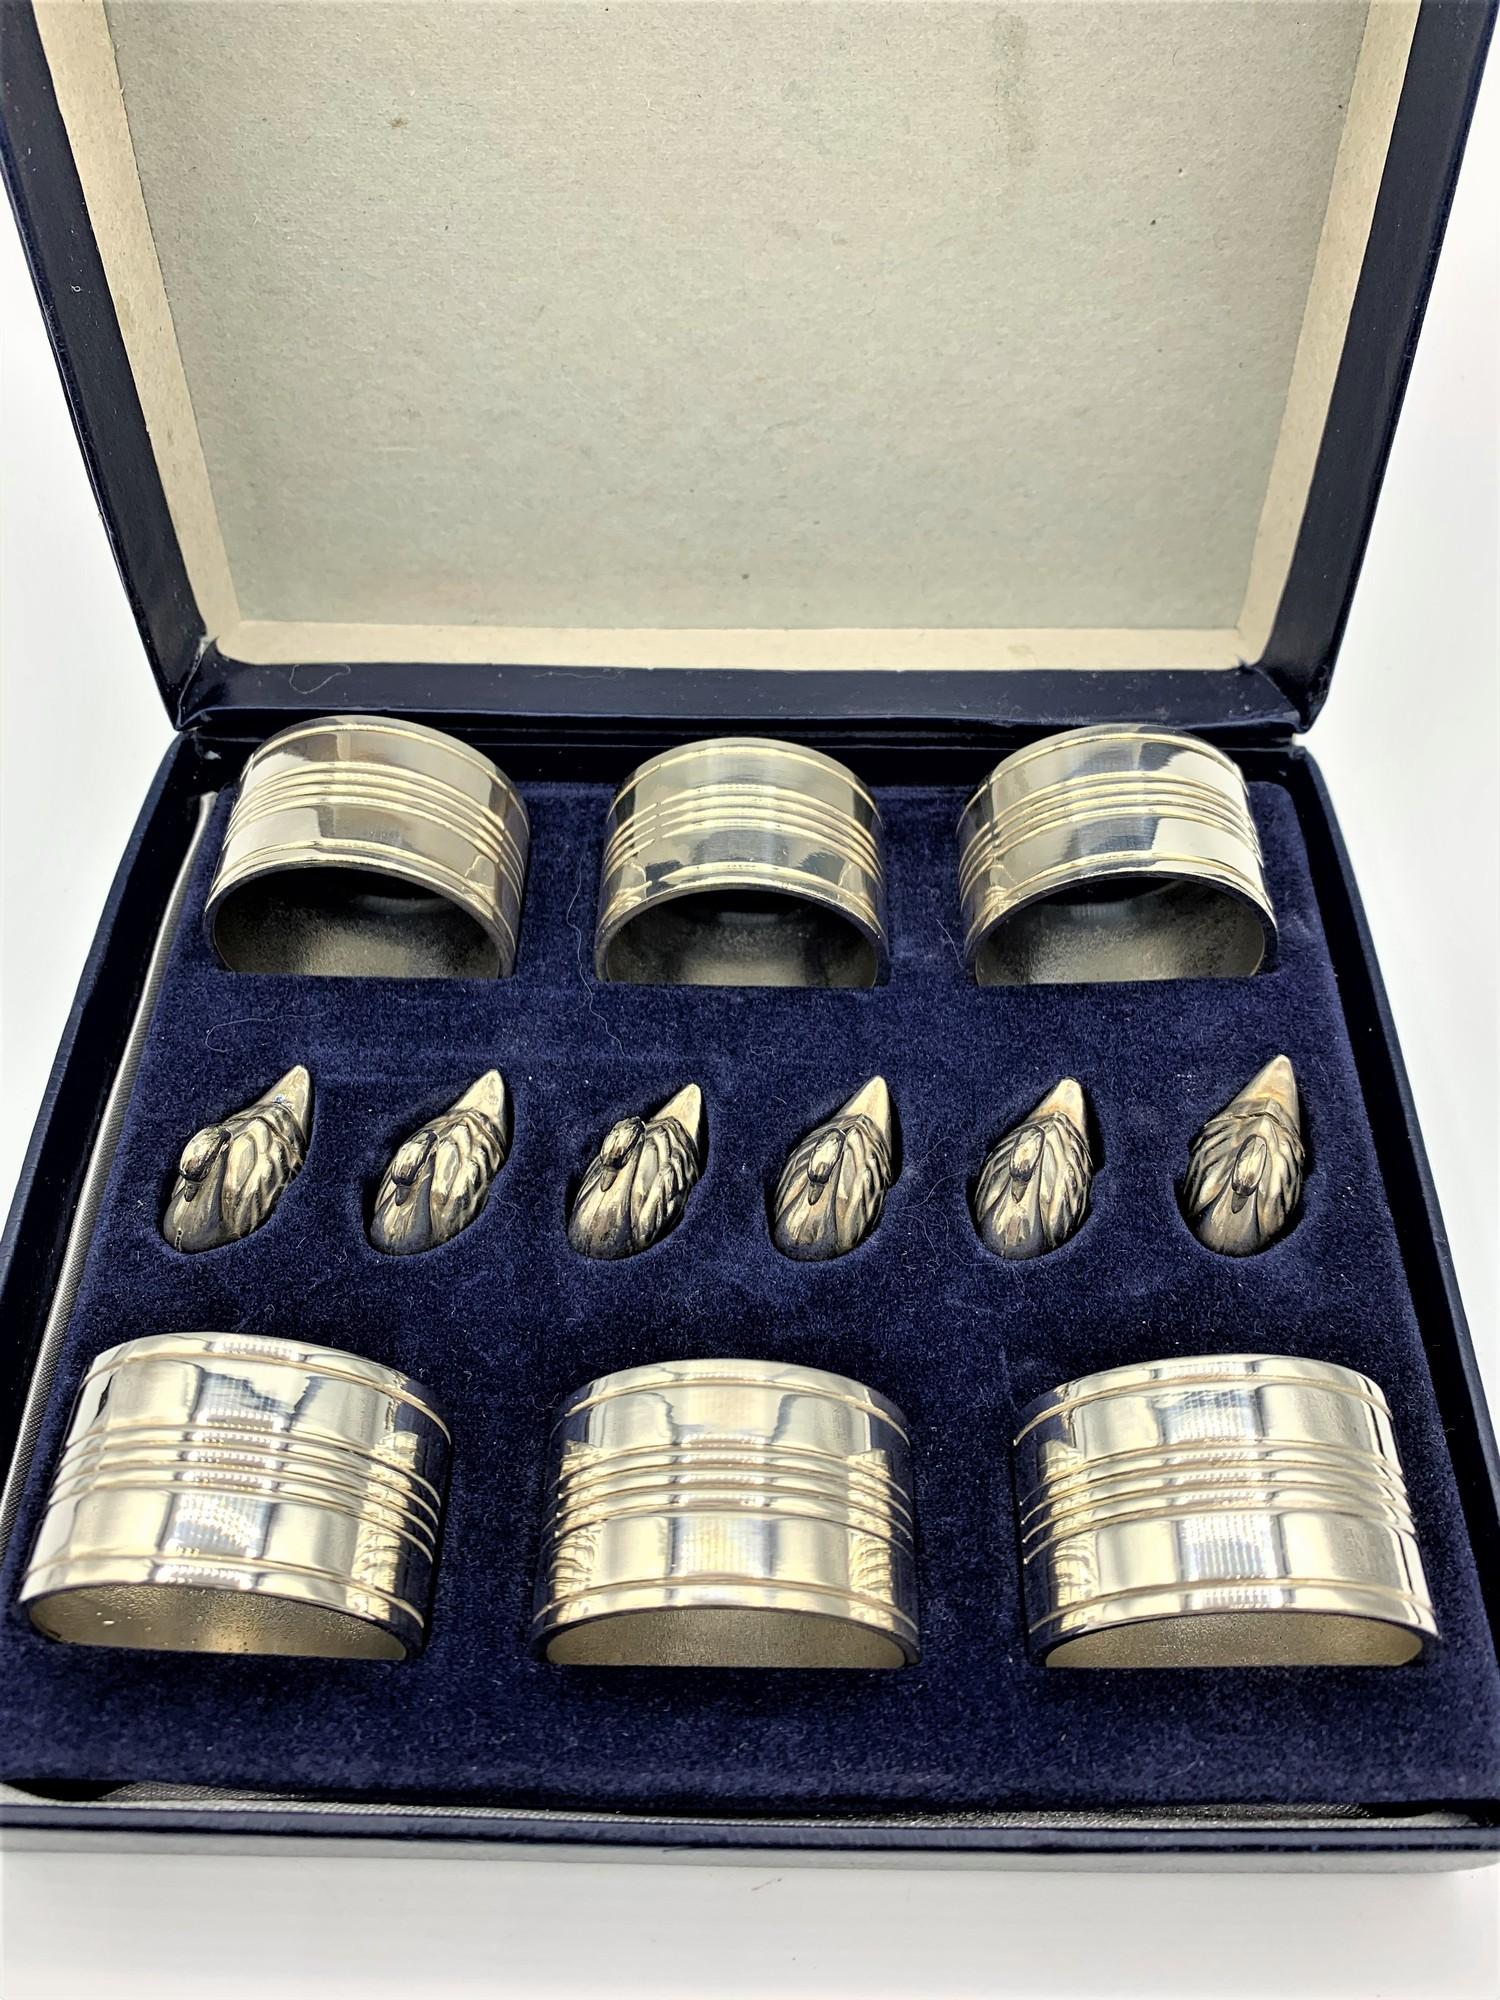 Boxed set of 6 serviette rings, with place setting swans & cards.